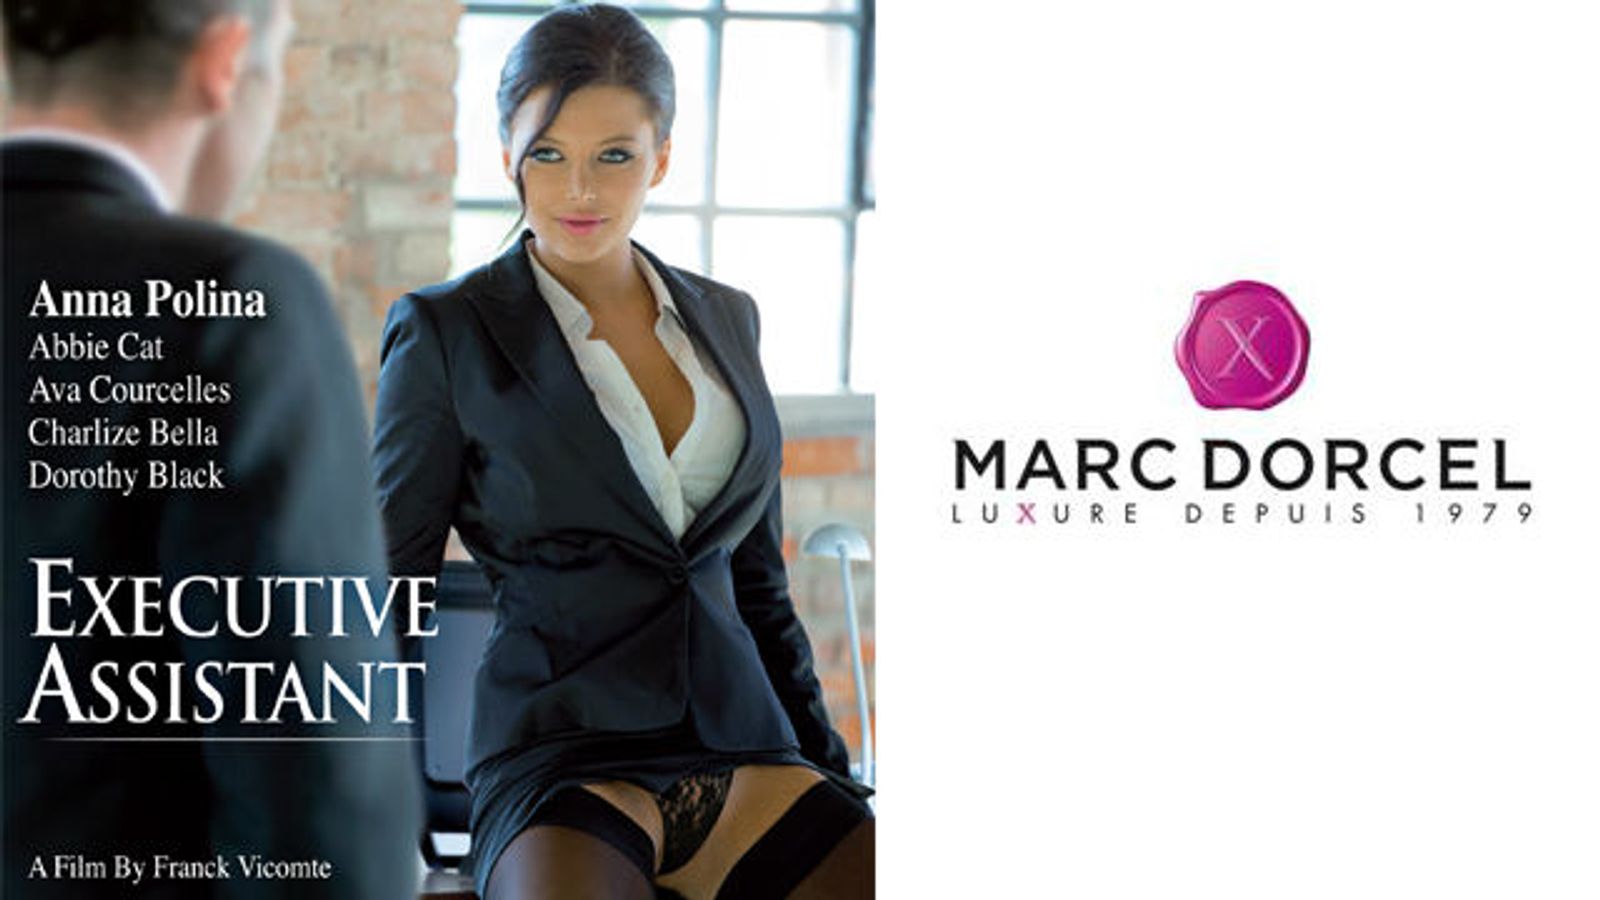 Marc Dorcel Heats Up March with Anna Polina, Lola Reve